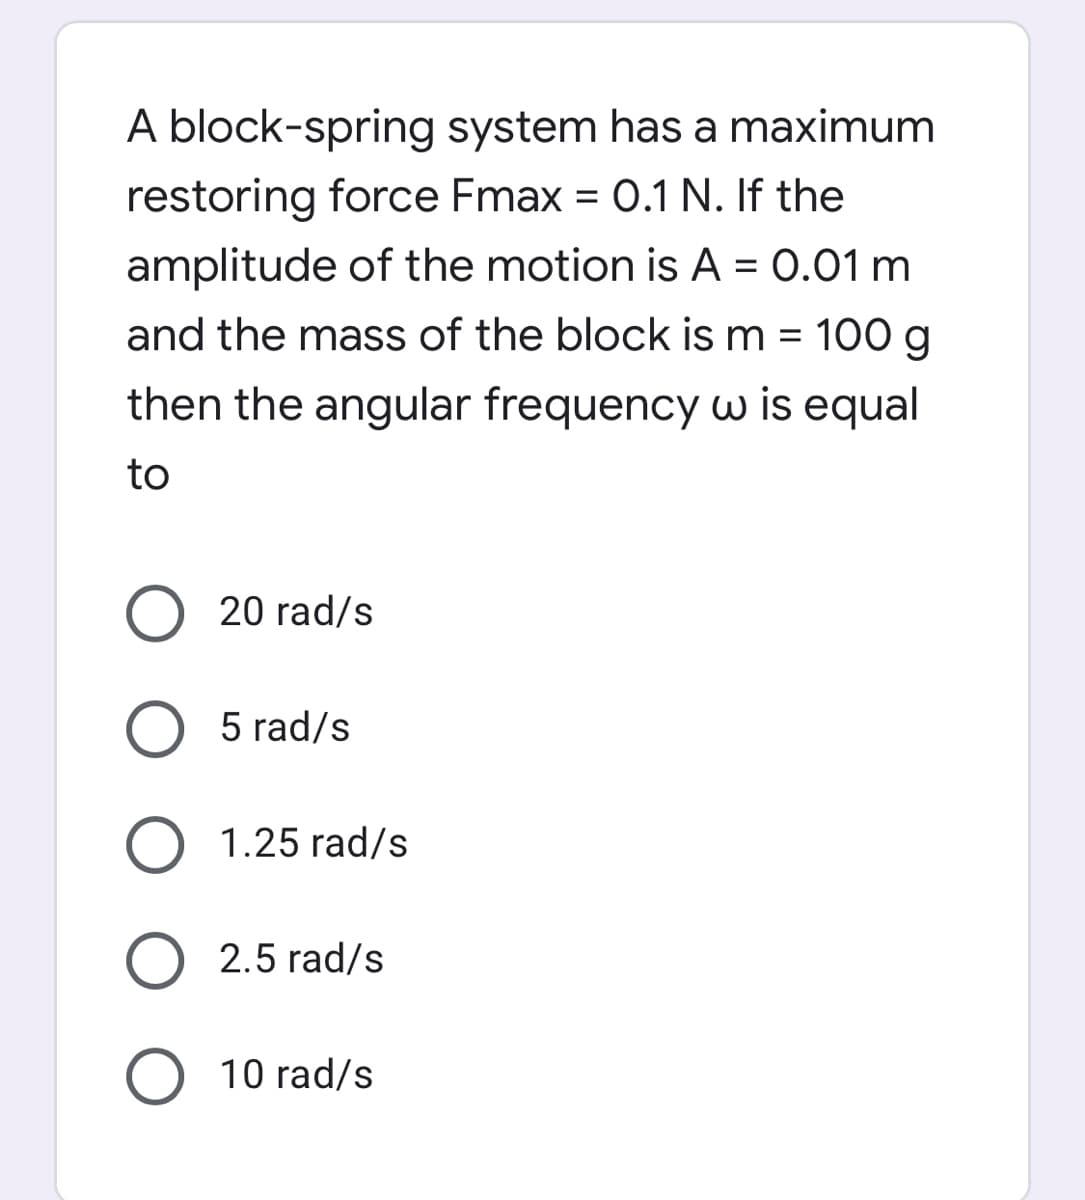 A block-spring system has a maximum
restoring force Fmax = 0.1 N. If the
amplitude of the motion is A = 0.01 m
and the mass of the block is m = 100 g
then the angular frequency w is equal
to
O 20 rad/s
O 5 rad/s
1.25 rad/s
2.5 rad/s
O 10 rad/s
